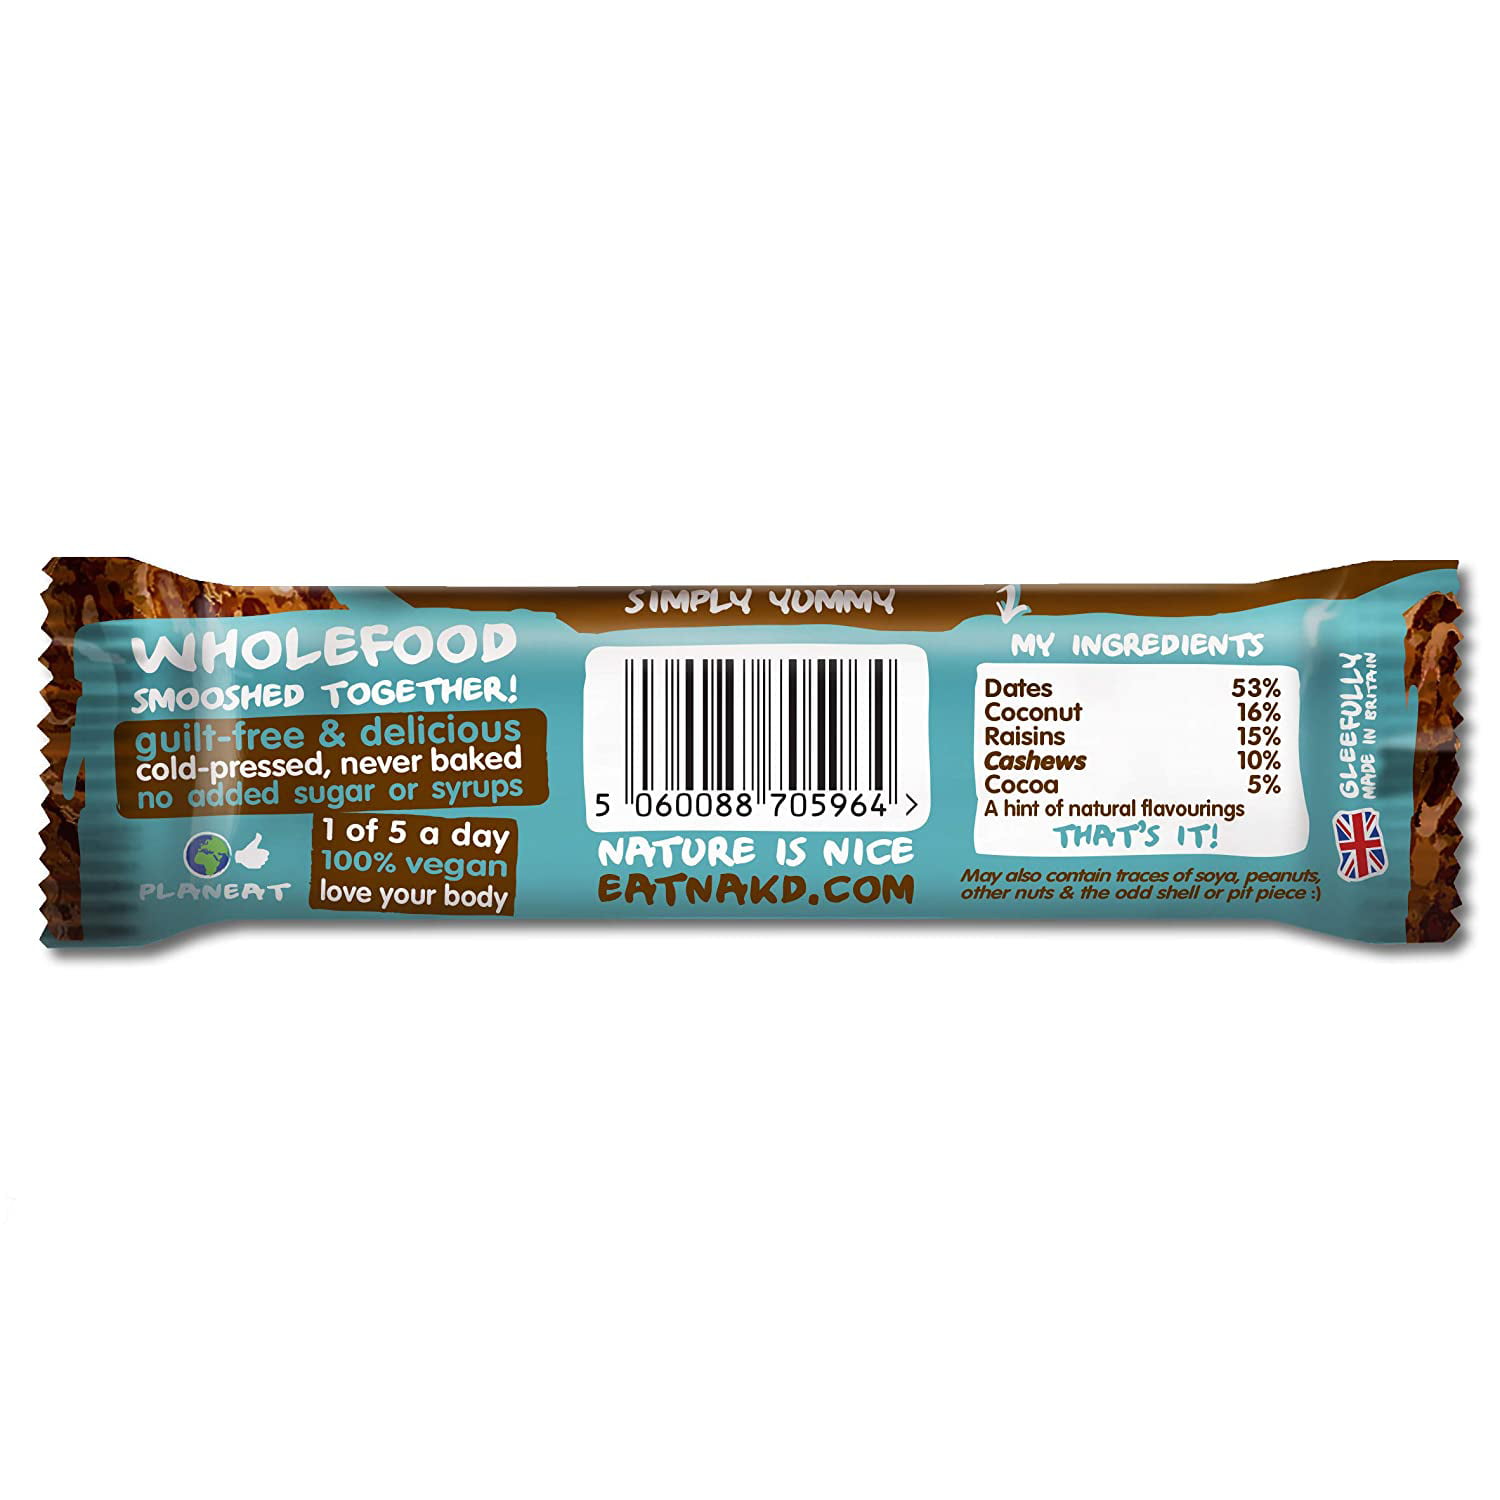 Nakd. 9-pack Chocolate Fruit & Nut Bars Assorted Flavors Vegan,  Gluten-free, and Wholesome -  Hong Kong